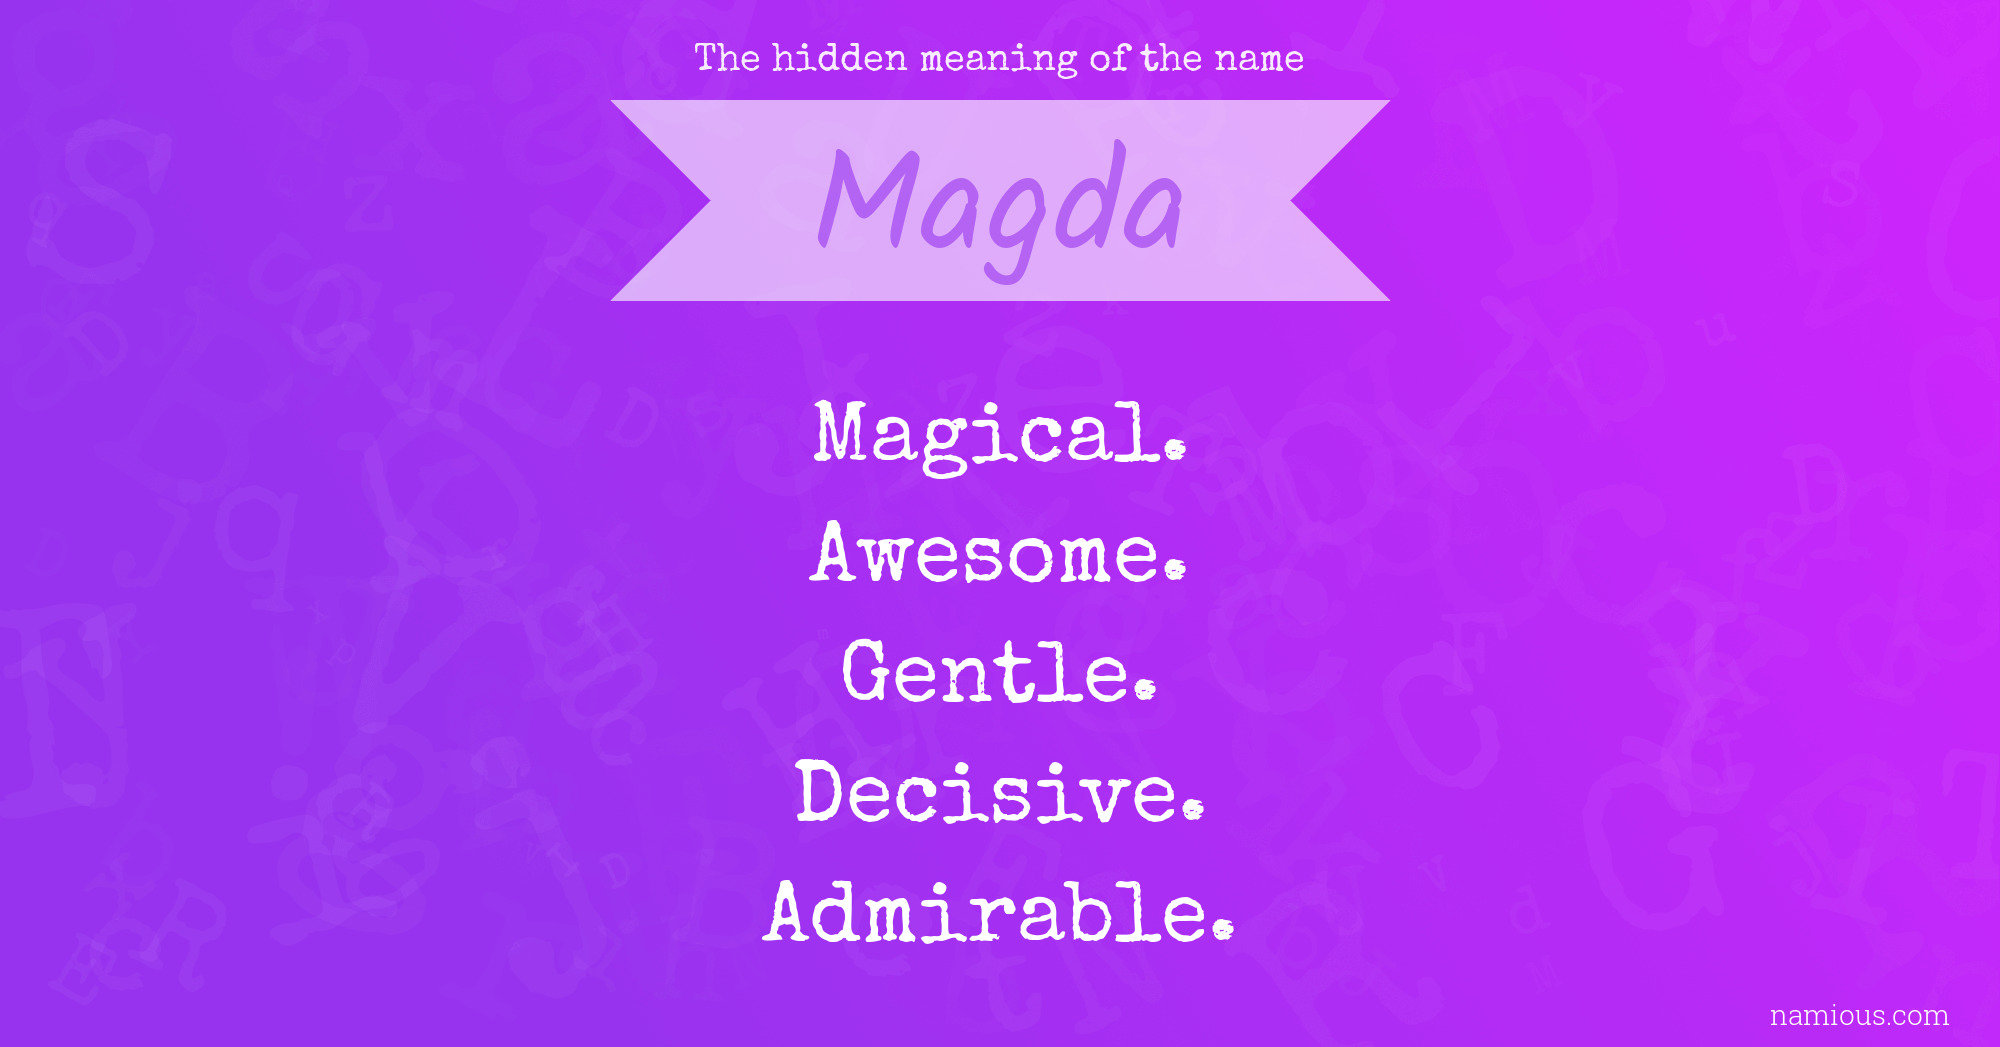 The hidden meaning of the name Magda